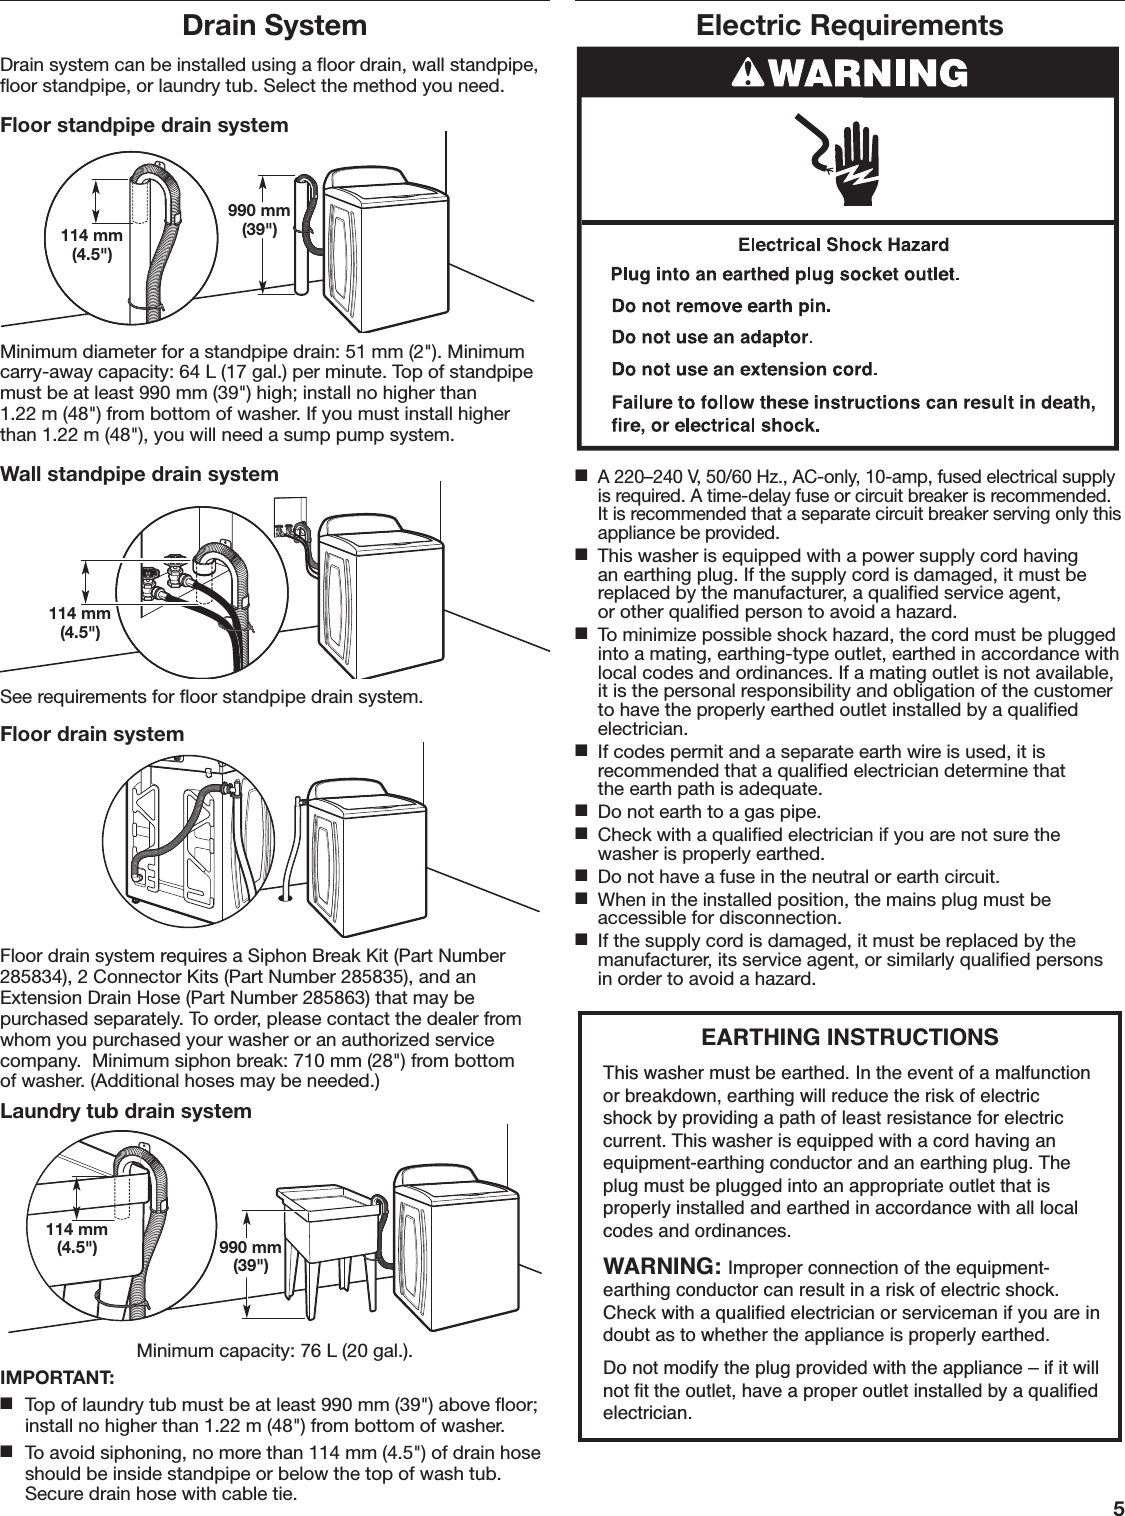 Page 5 of 11 - Whirlpool 4KWTW4815FW0 User Manual  WASHER - Manuals And Guides 1711153L